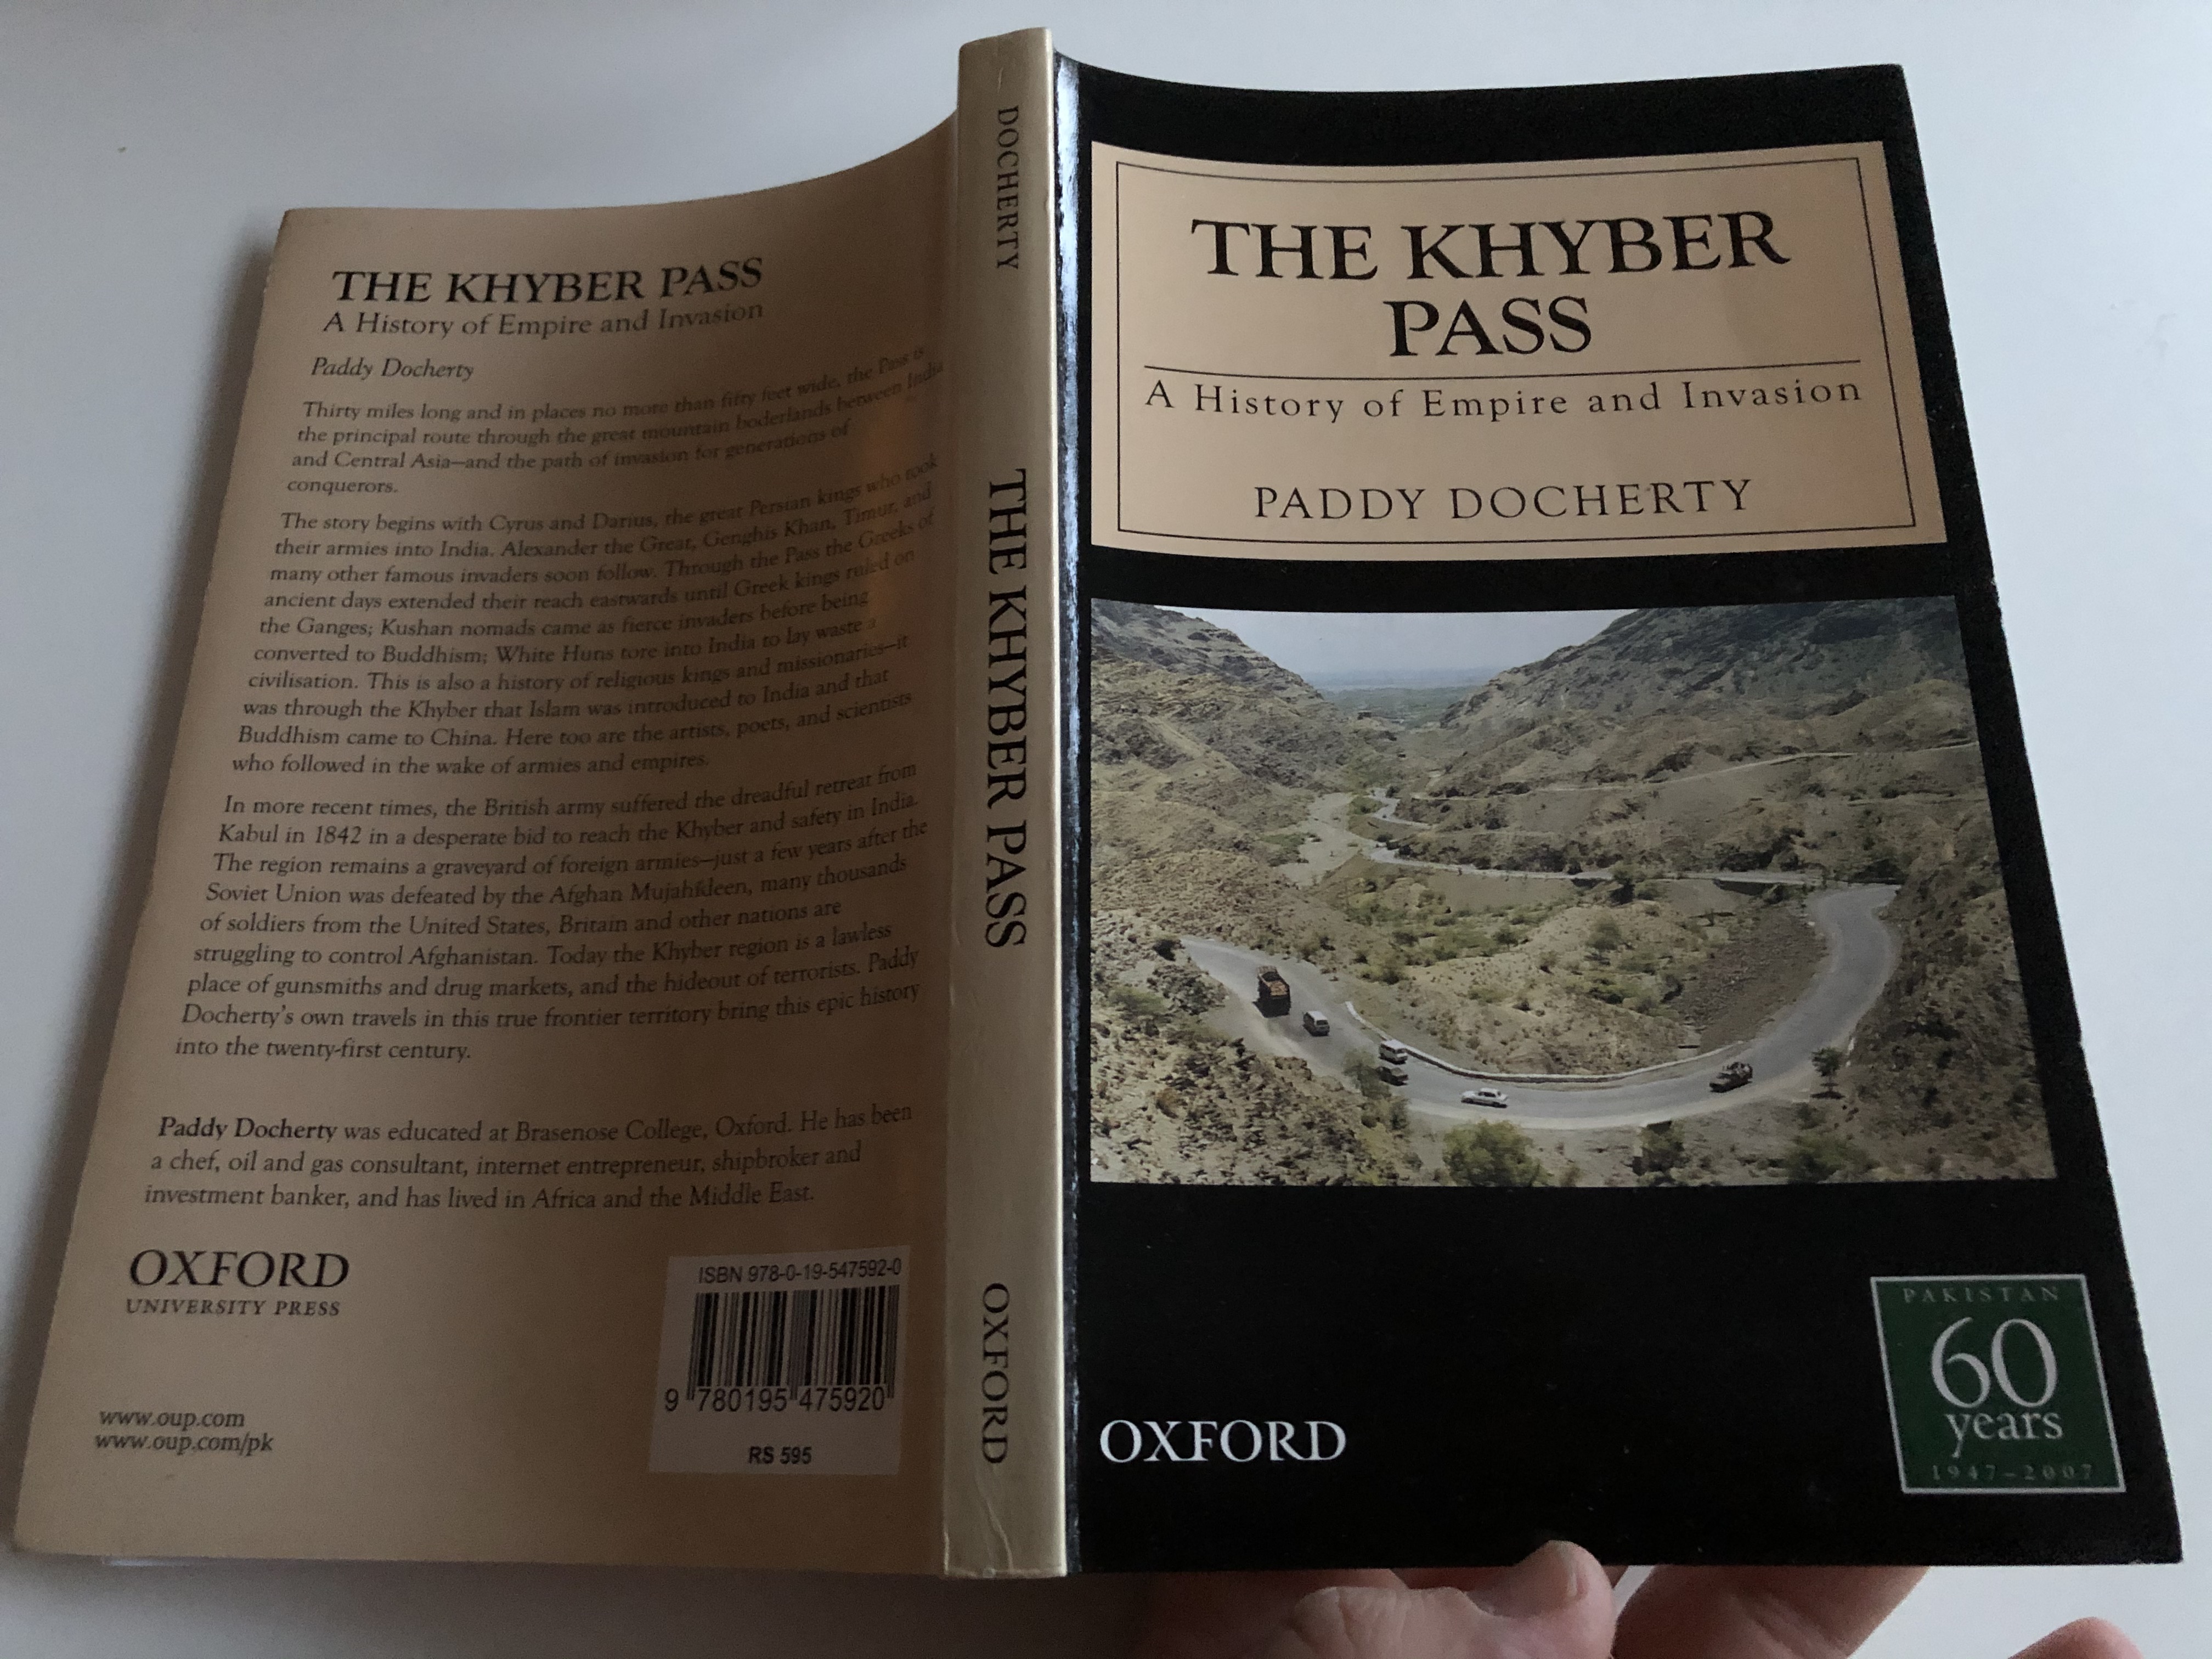 the-khyber-pass-a-history-of-empire-and-invasion-by-paddy-docherty-13-.jpg